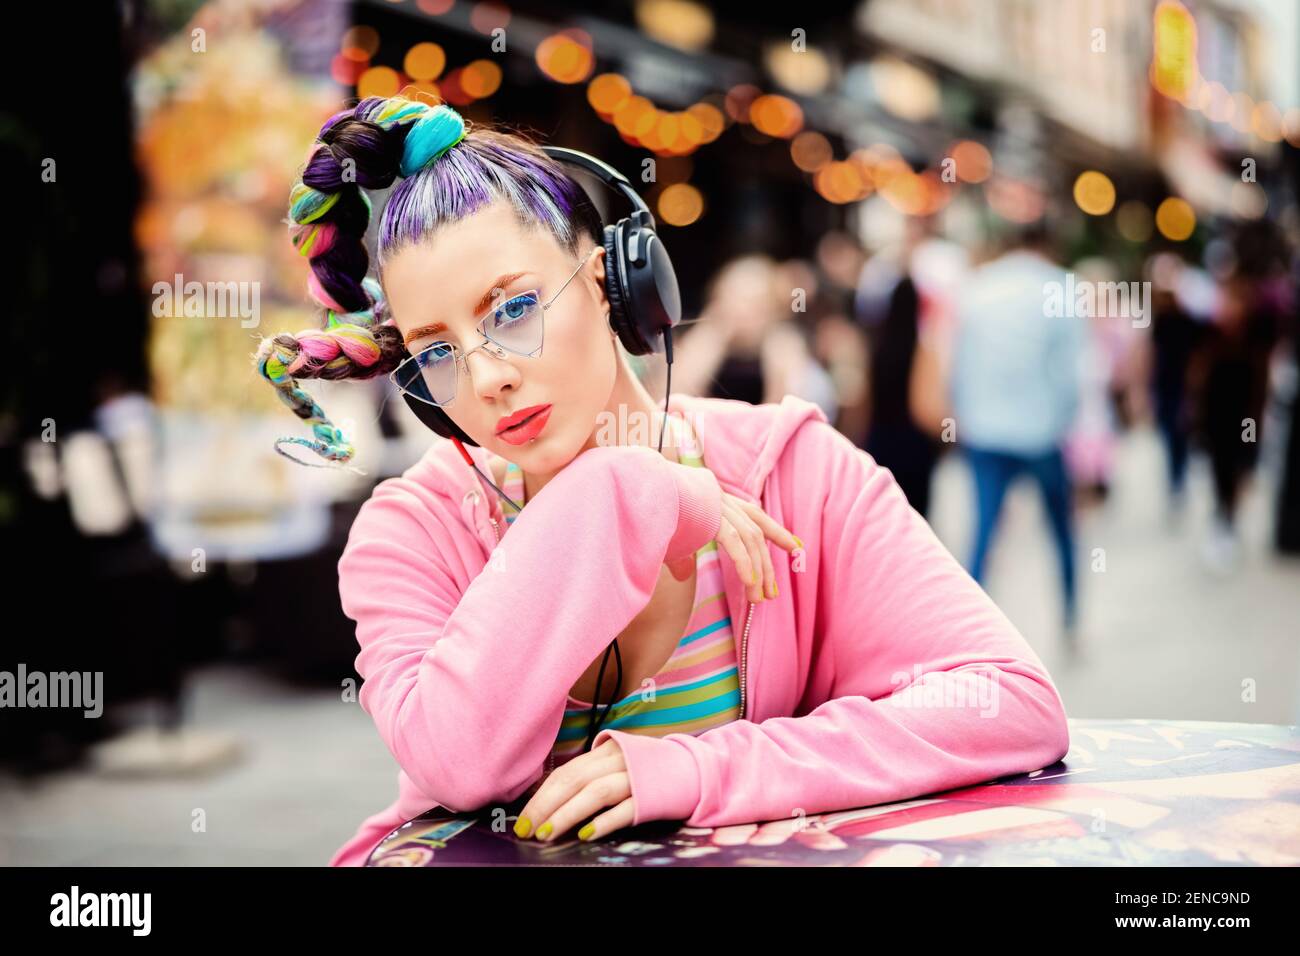 Playful cool rebel funky hipster young girl listening music on headphones at city street Stock Photo